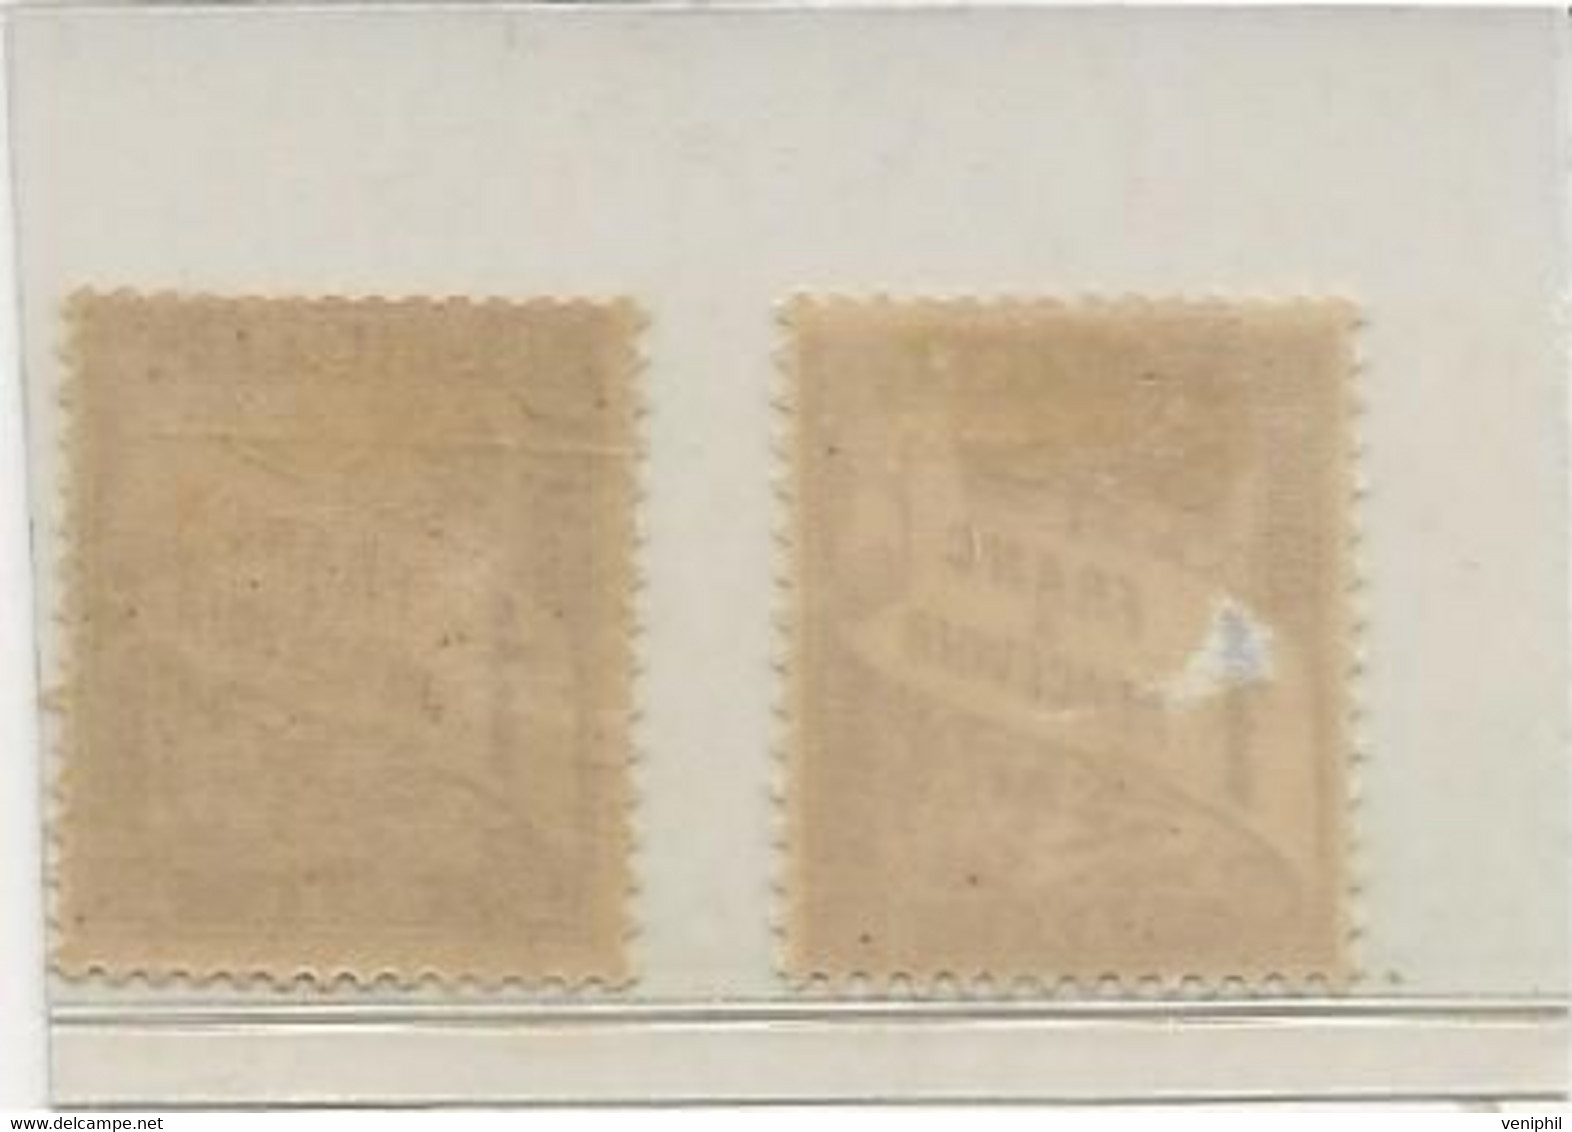 TIMBRES TAXES N° 40 ET 40 A - NEUF CHANIERE - COTE ; 12,30 € - 1859-1959 Mint/hinged